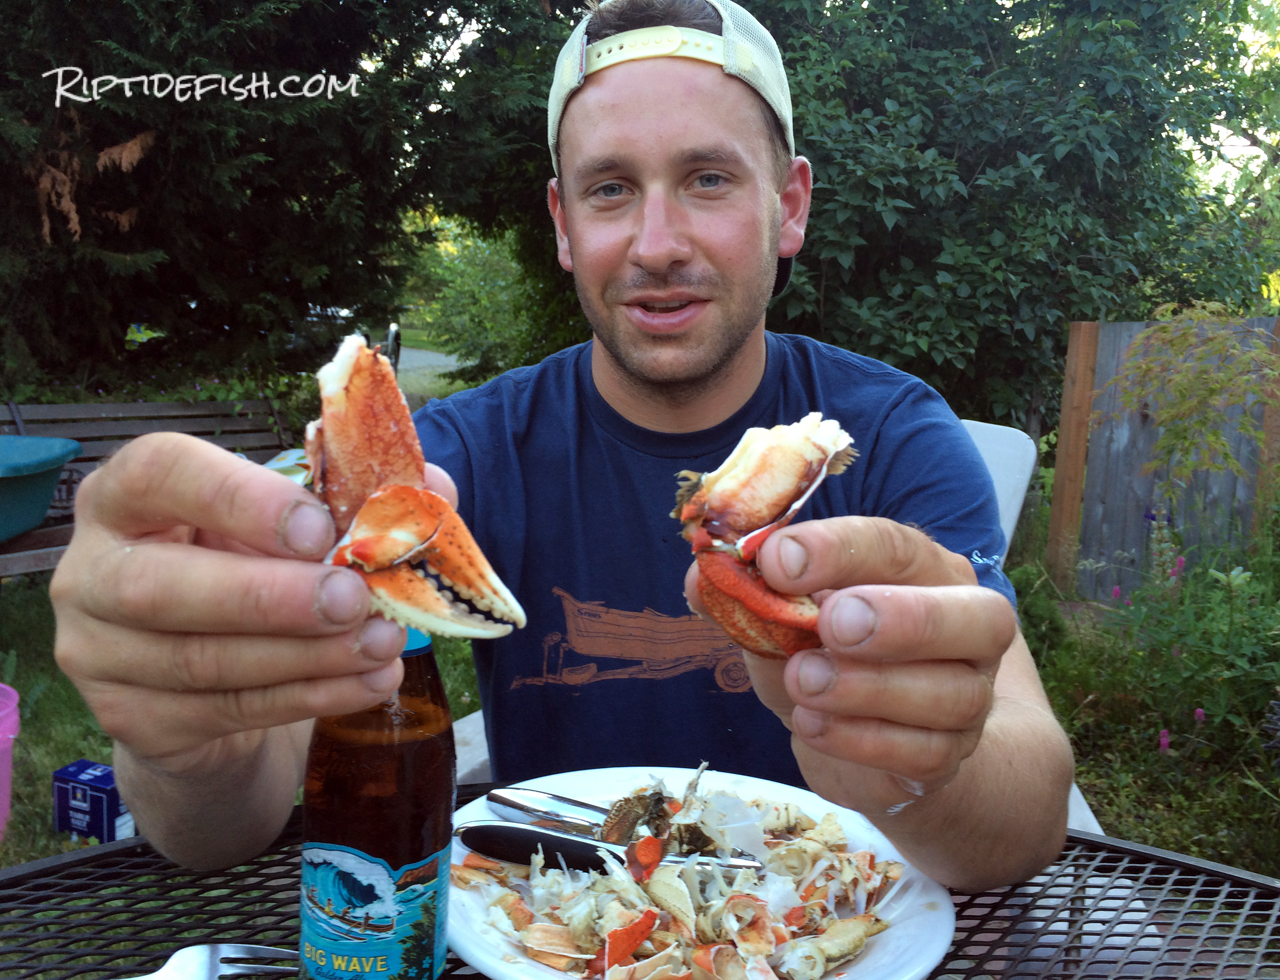 My favorite way to eat Dungeness Crab is with nothing more than a cold brew and a dish of melted butter for dipping!